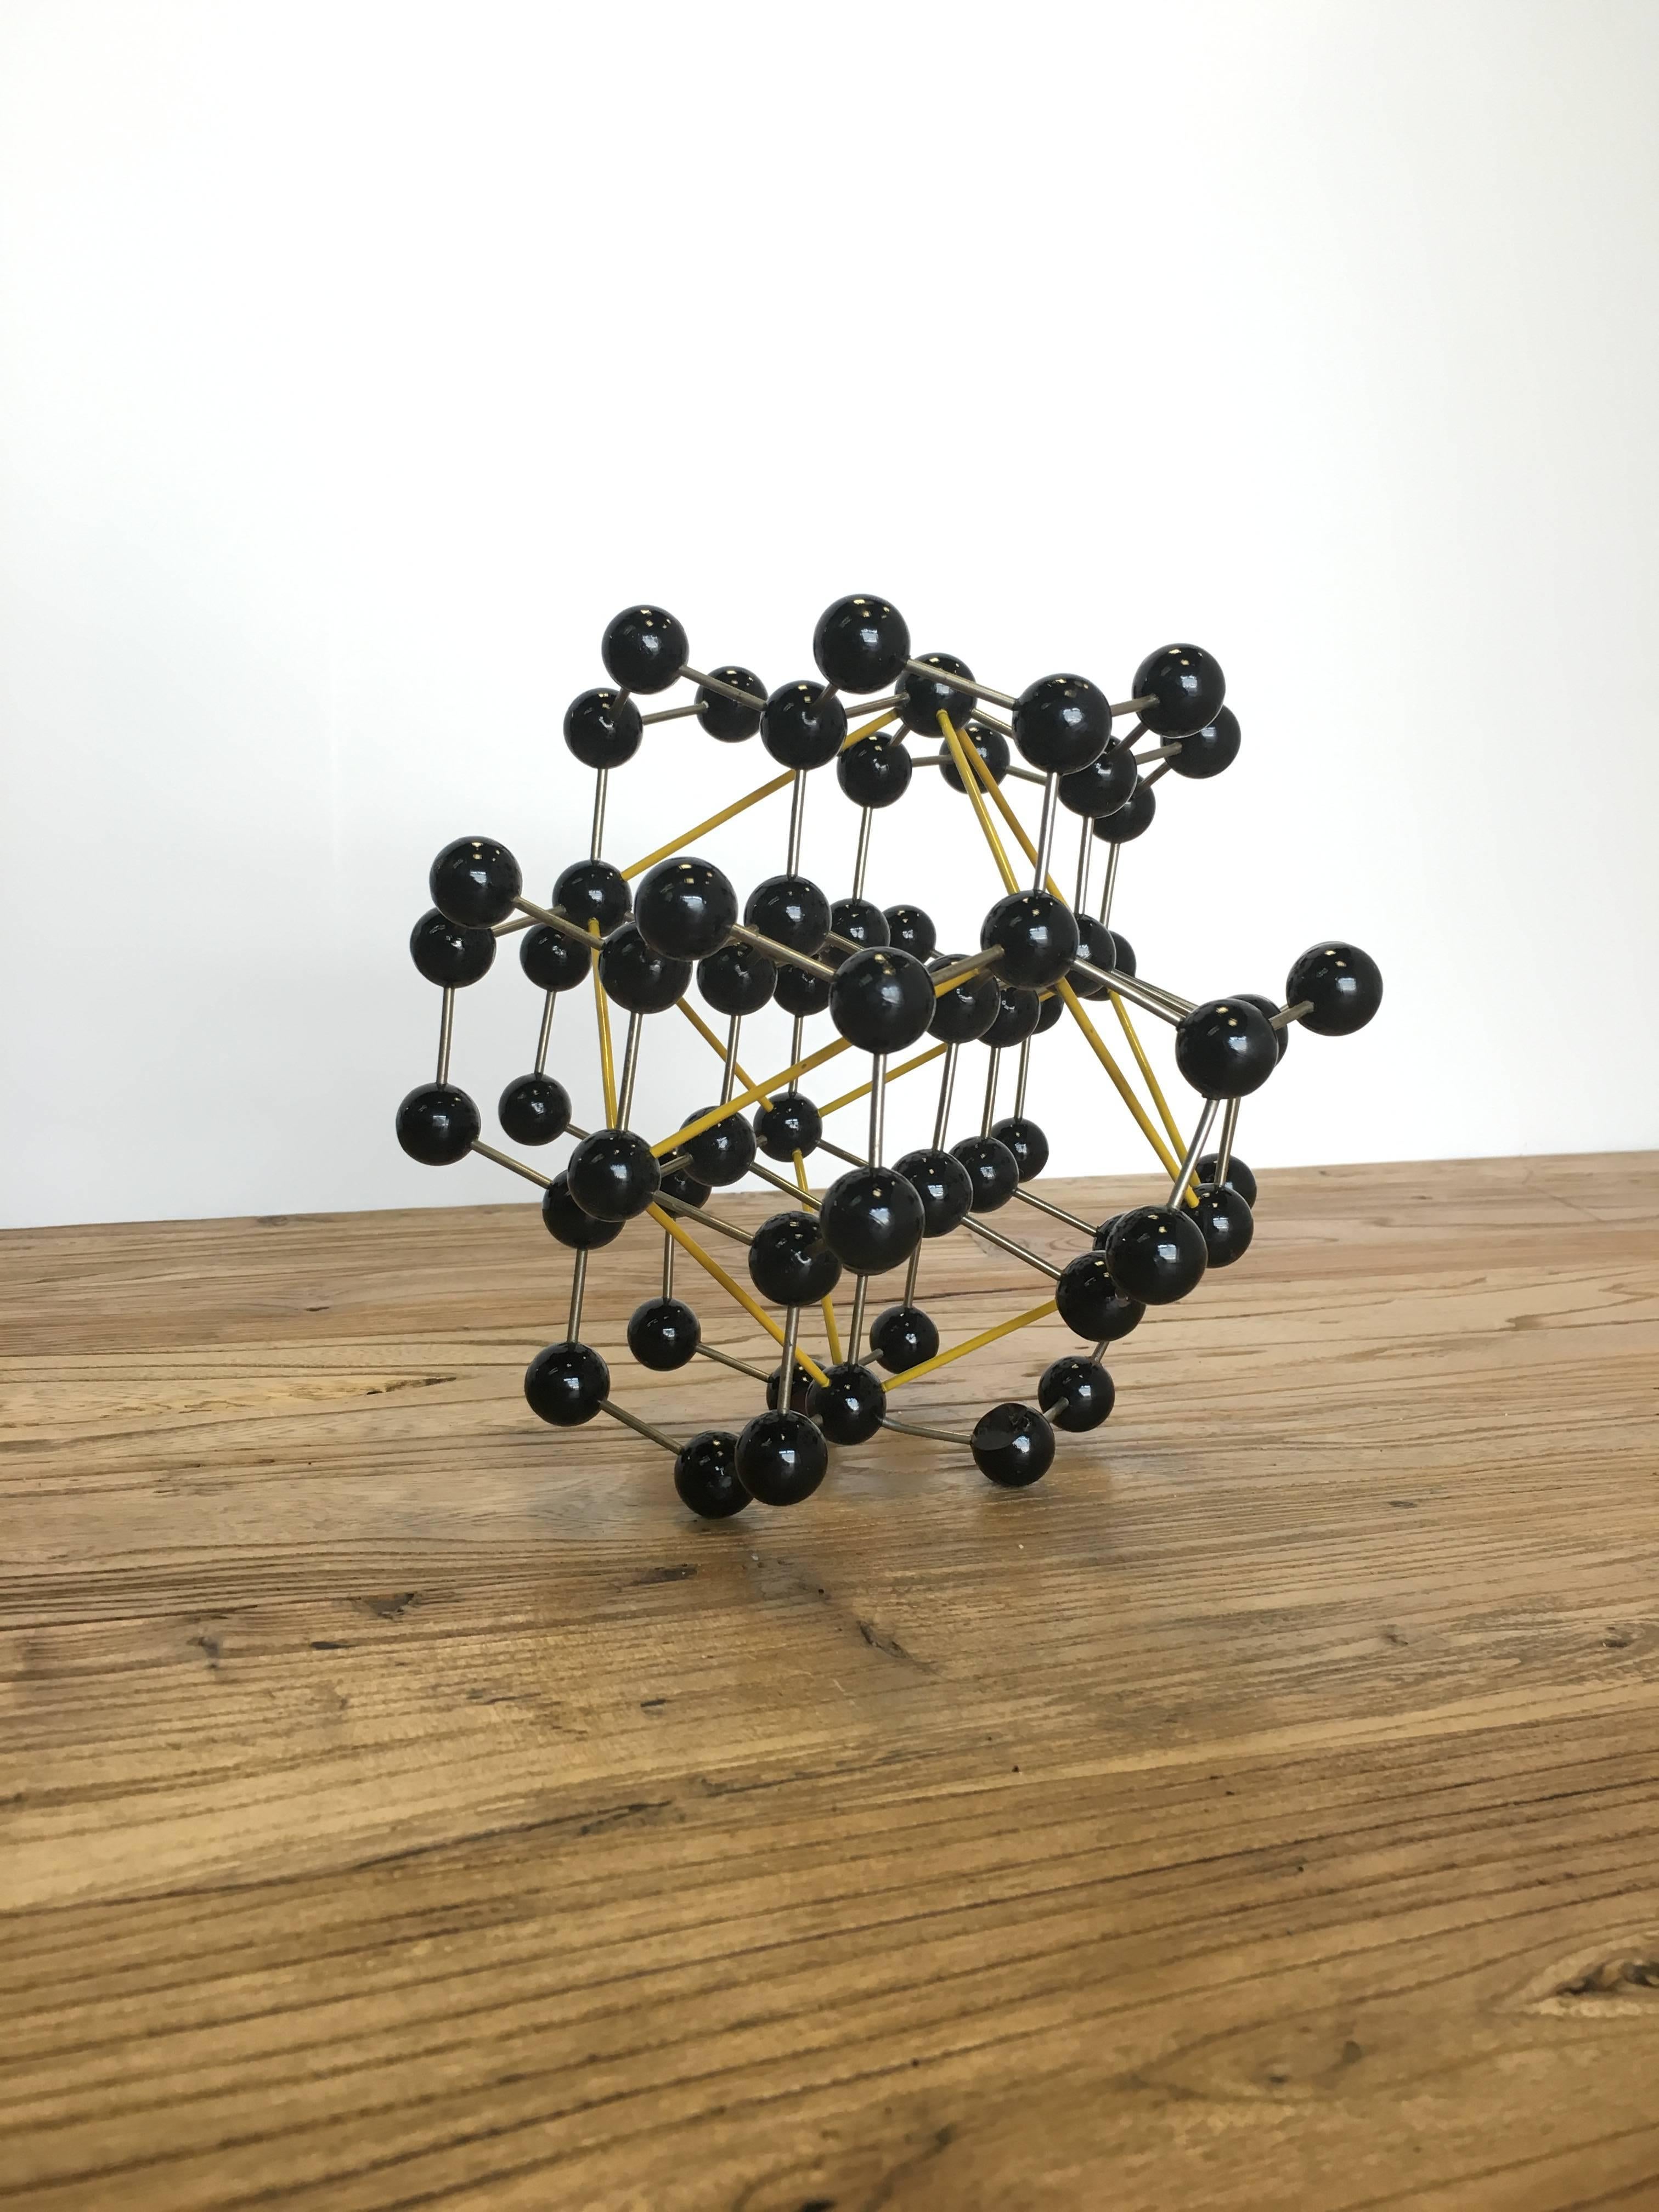 Vintage ball and stick molecular model depicting elemental structure of diamond, circa 1950s.